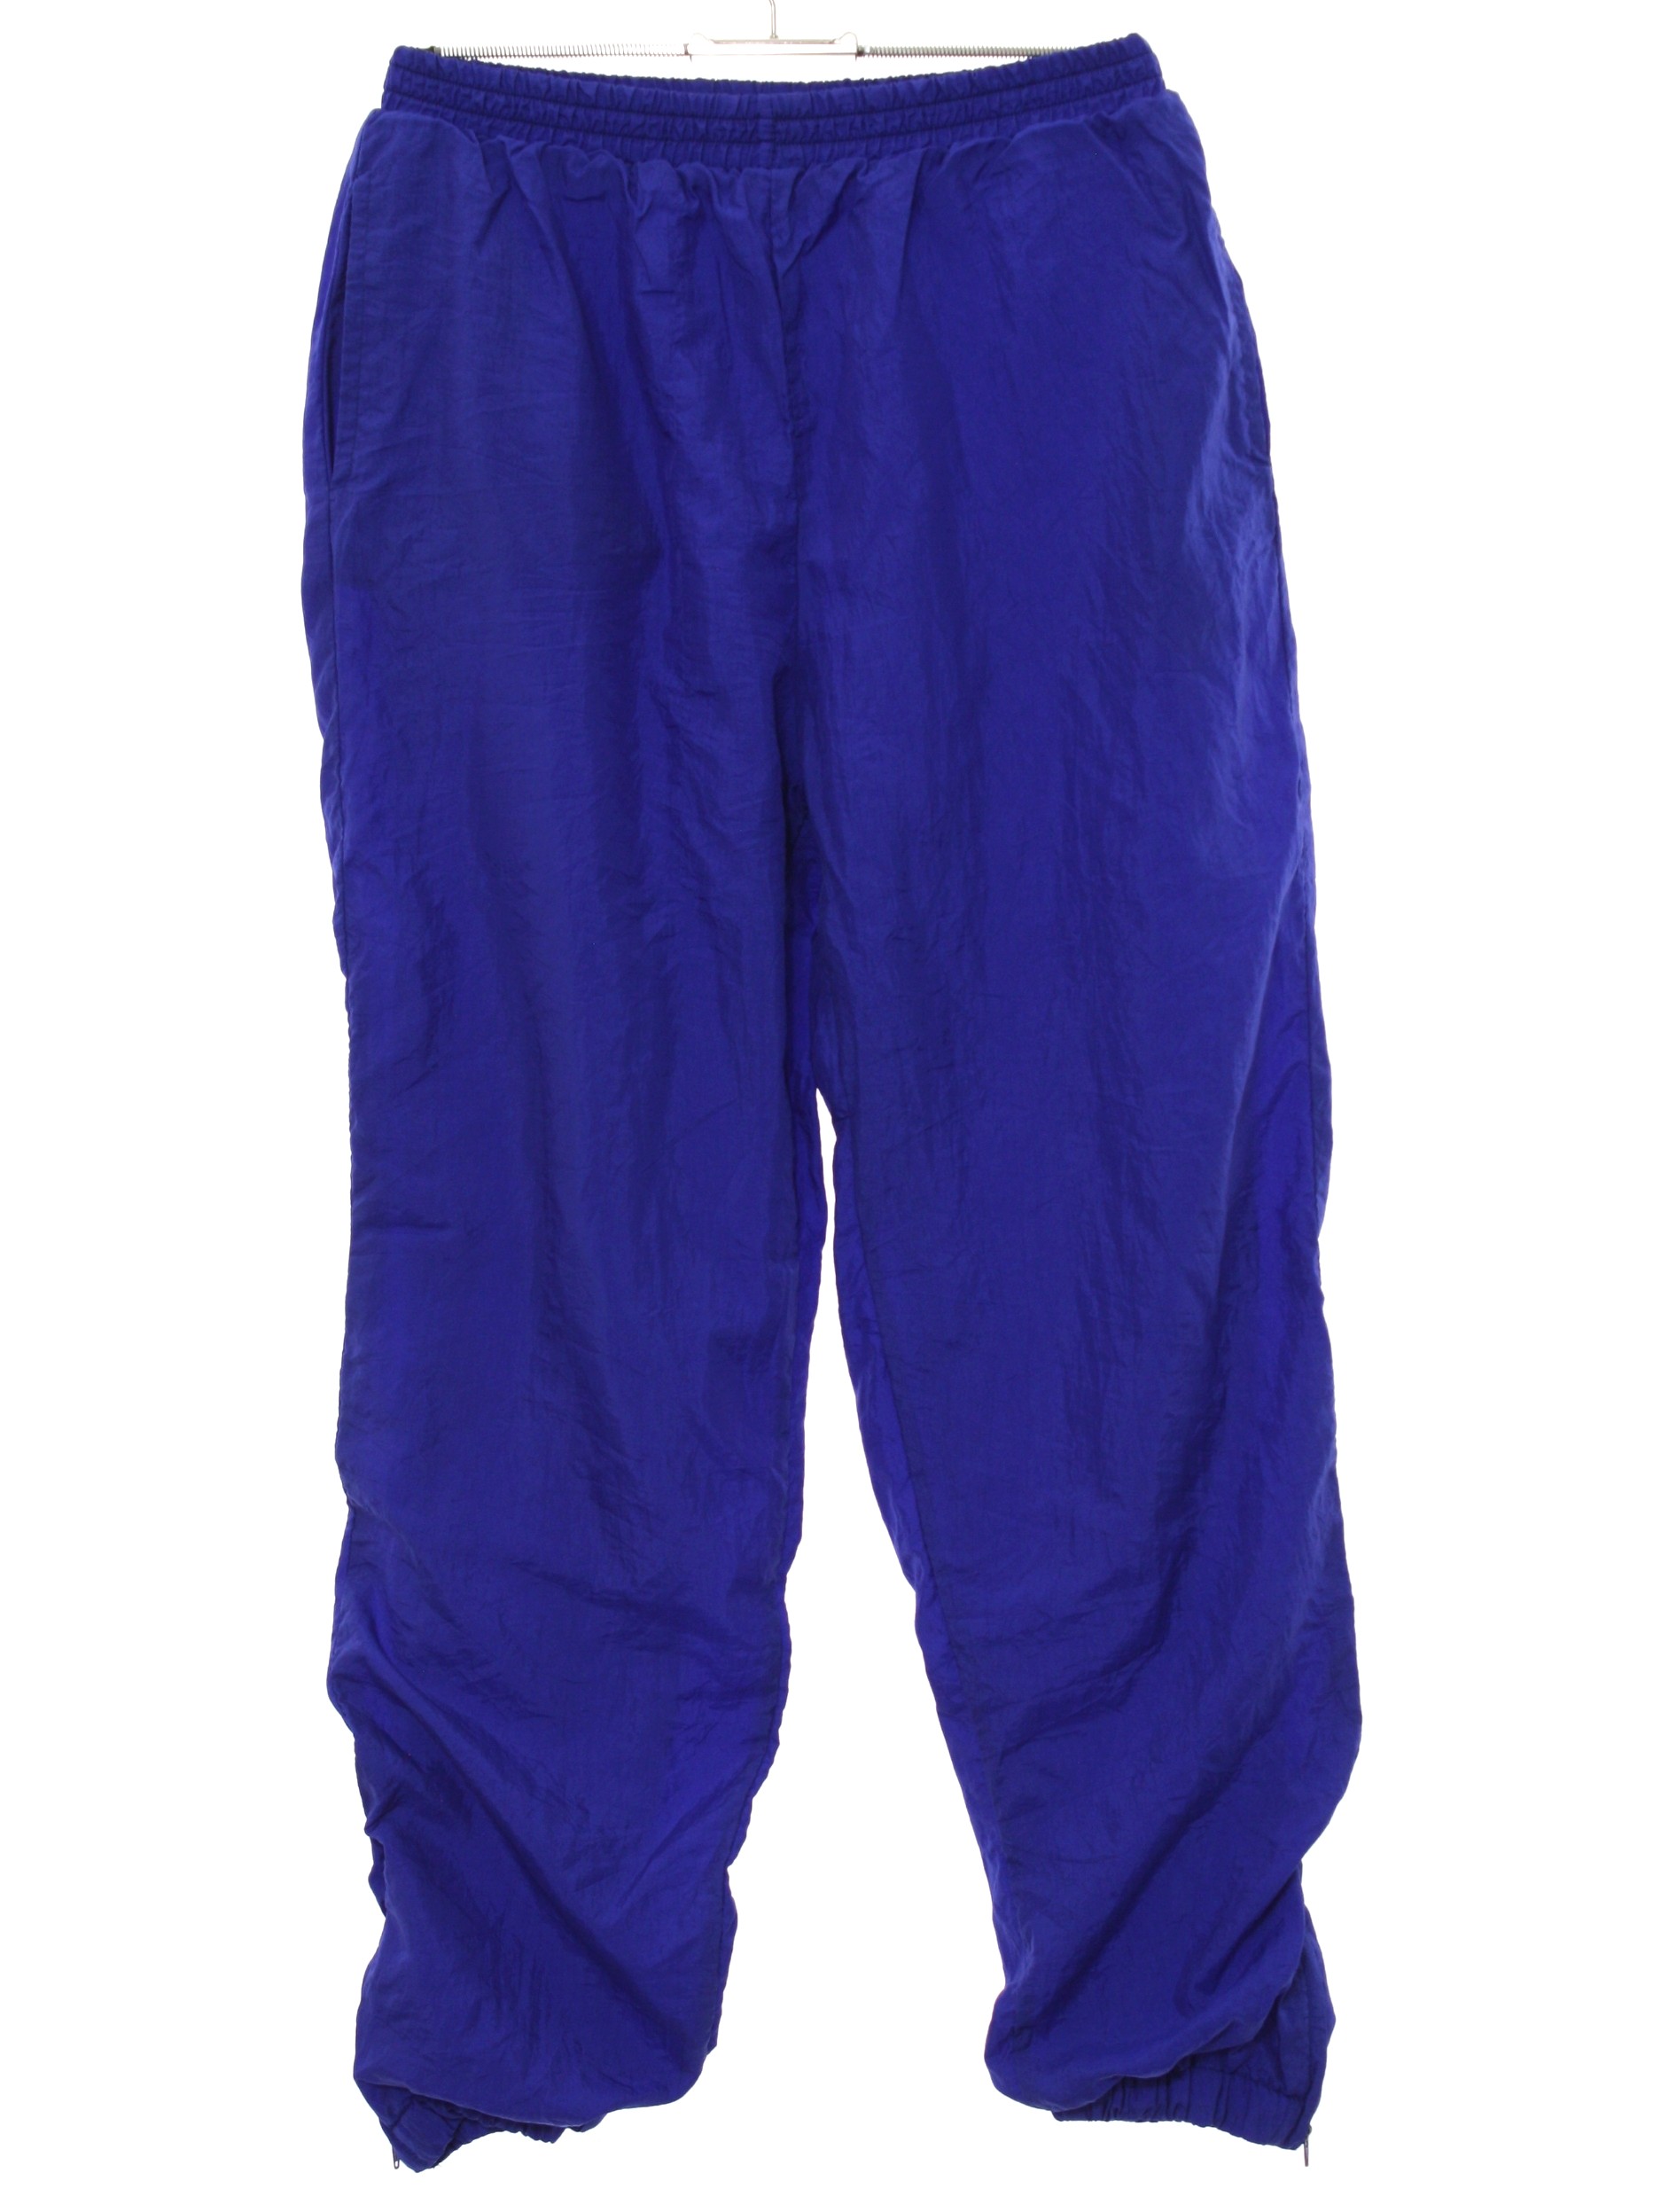 90s Retro Pants: 90s -Care Label- Womens royal blue solid colored nylon ...